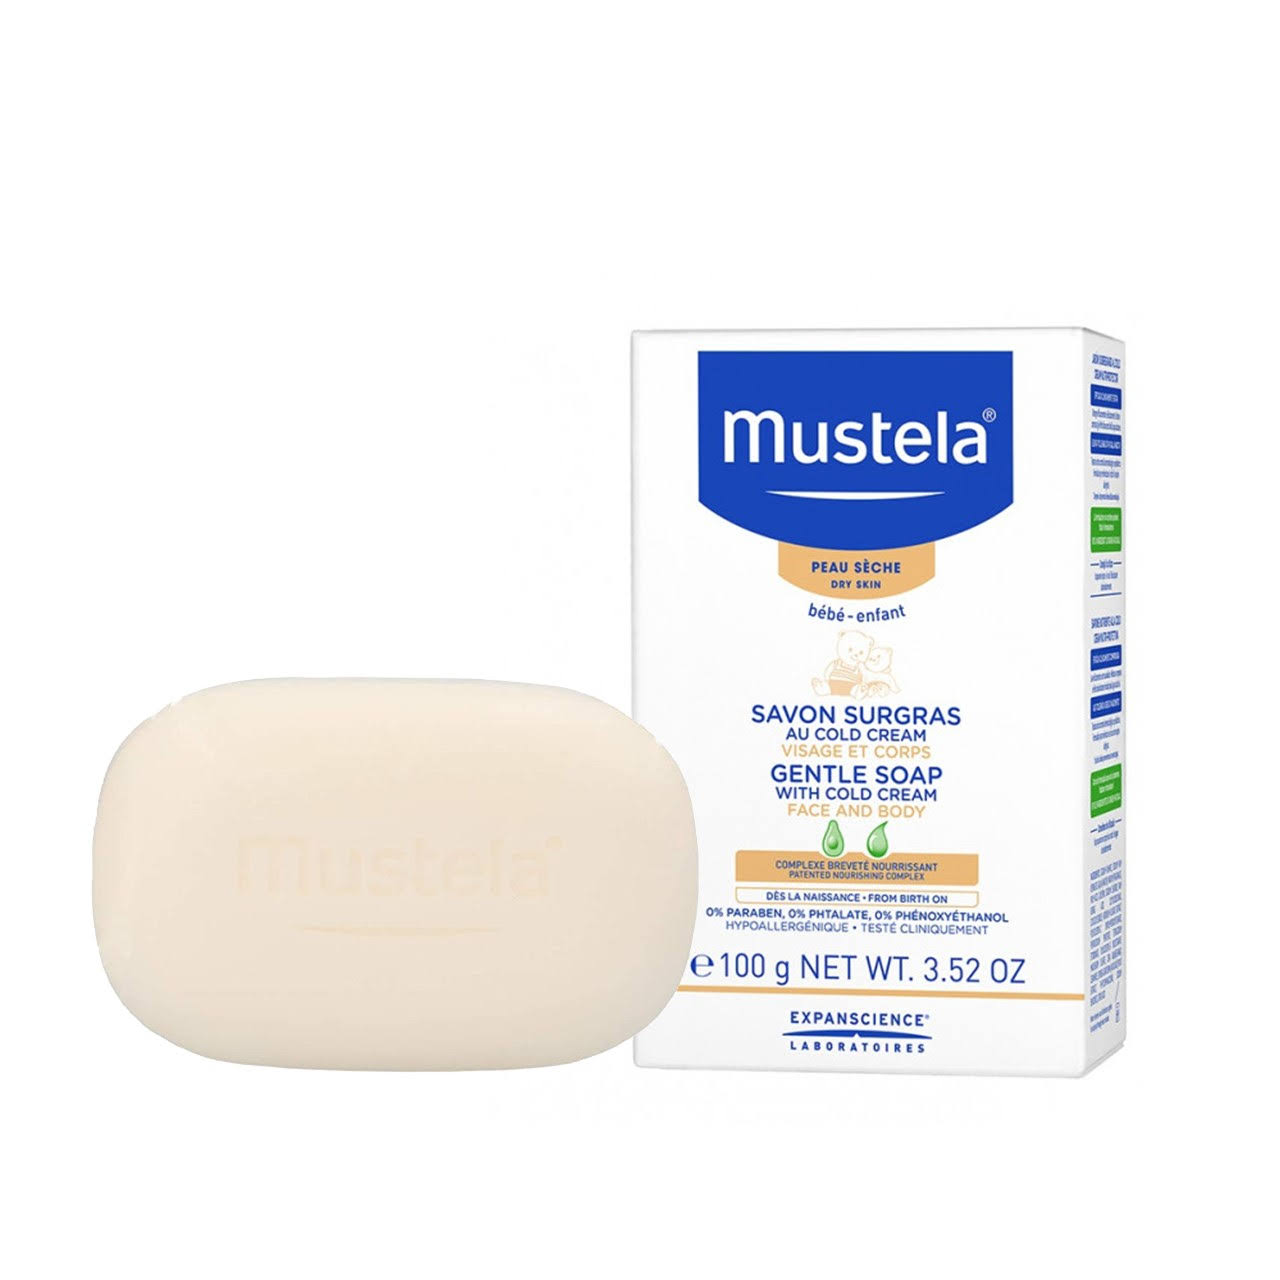 Mustela Gentle Soap with Cold Cream - 100g